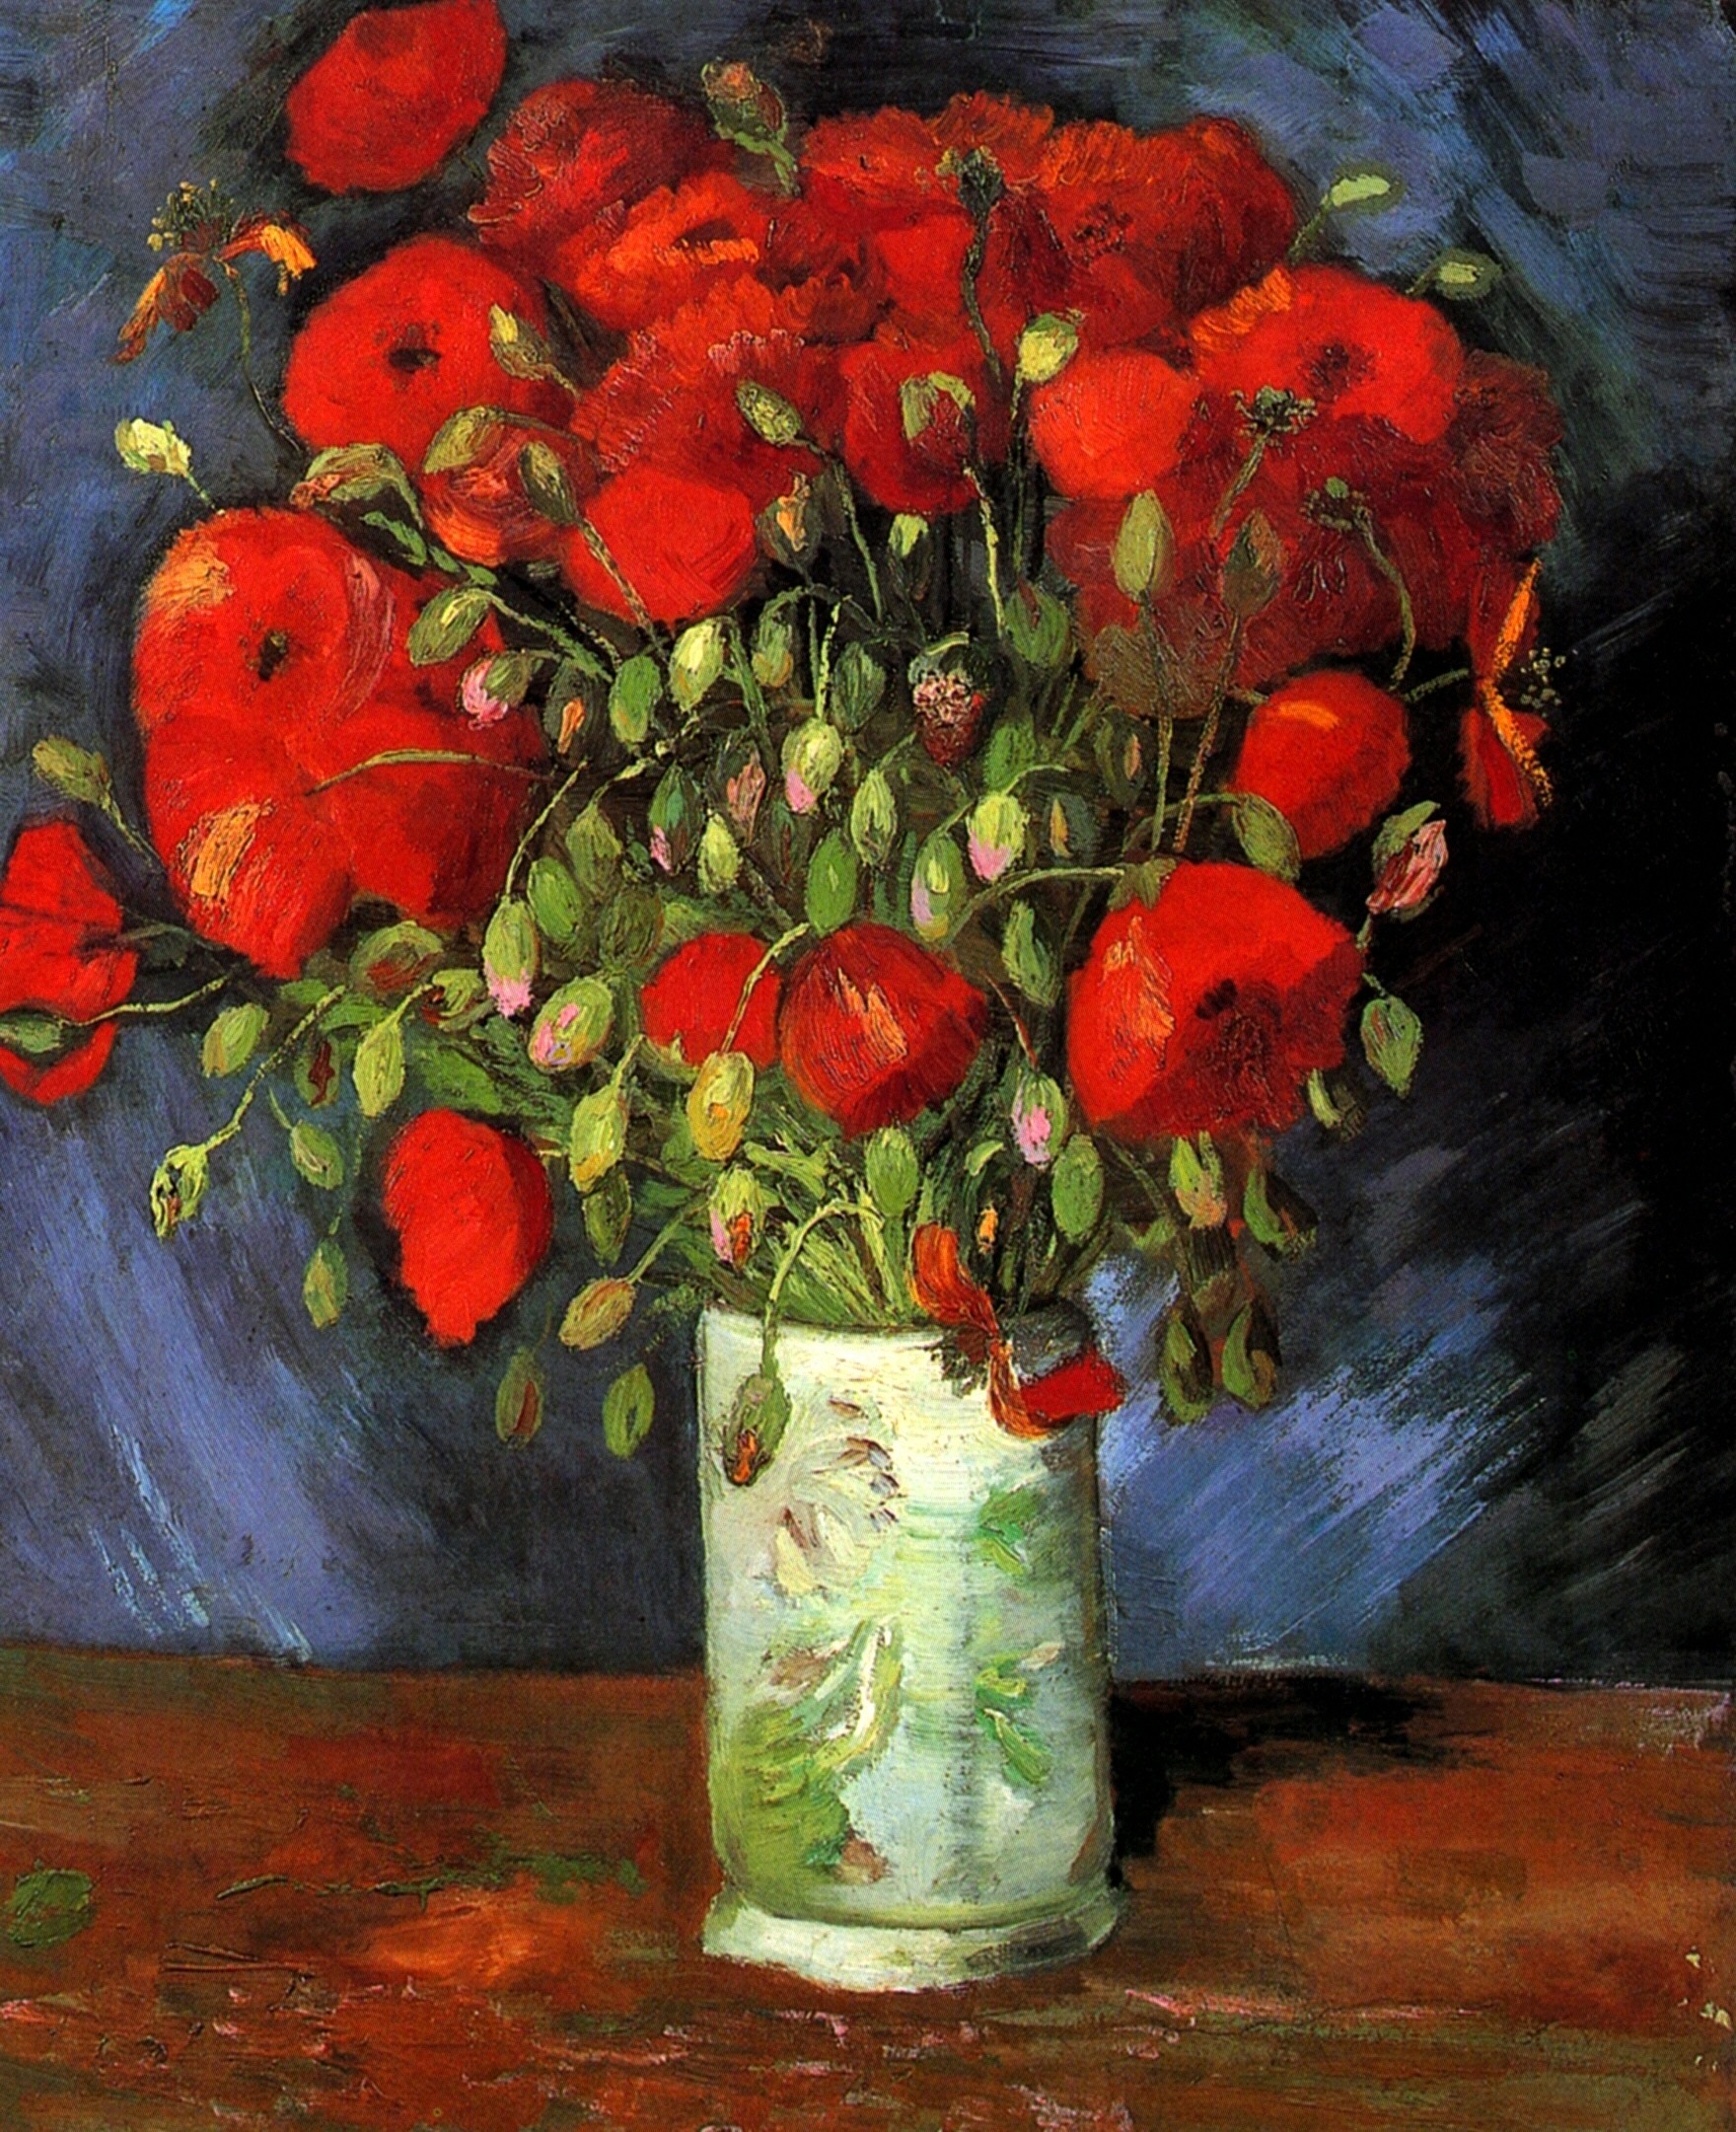 Vase with Red Poppies by Vincent Van Gogh, 1886